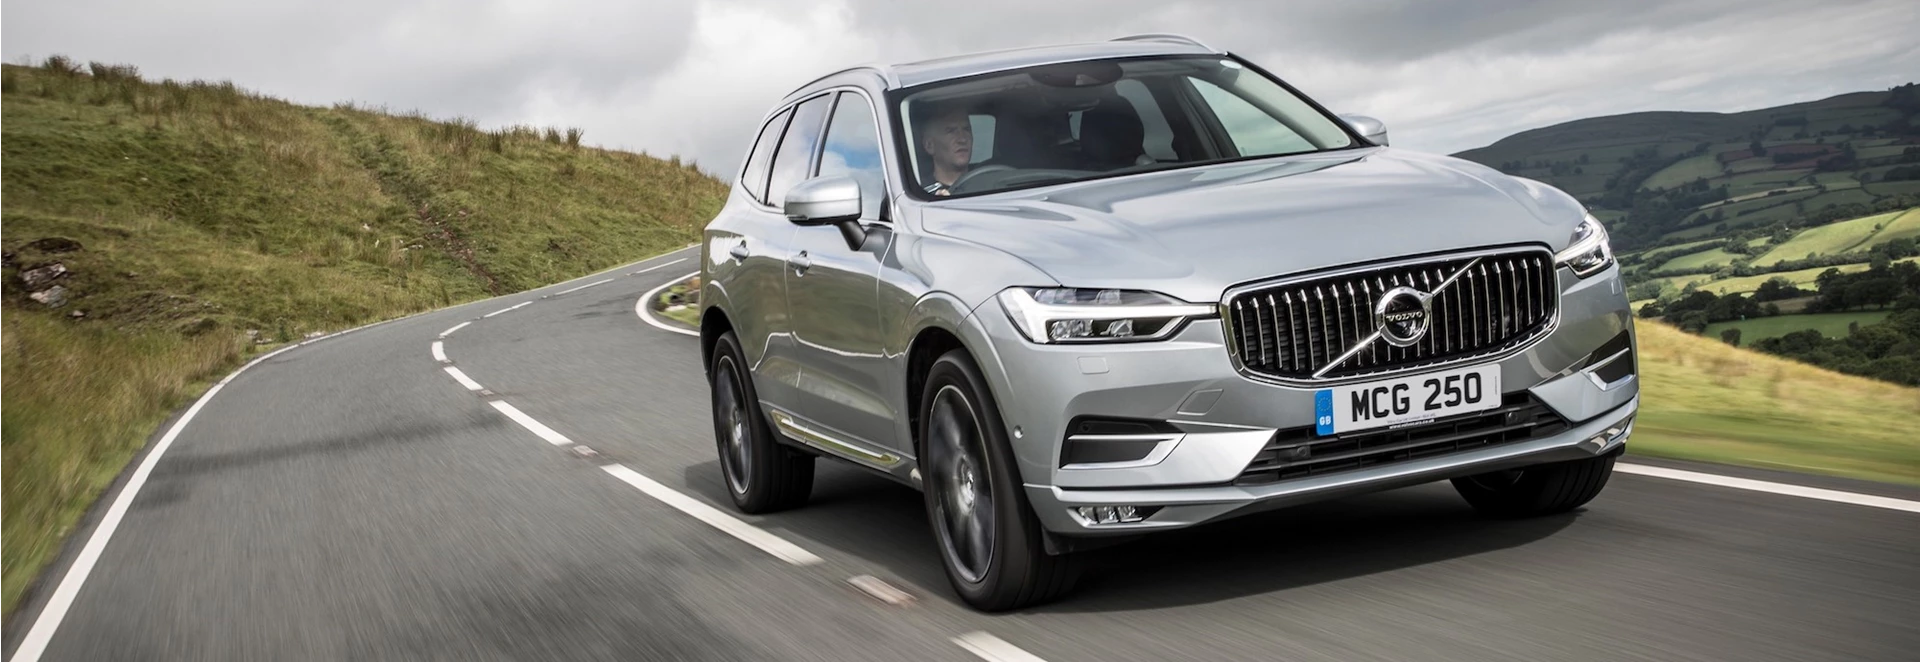 Volvo XC60 wins 2019 Towcar of the Year